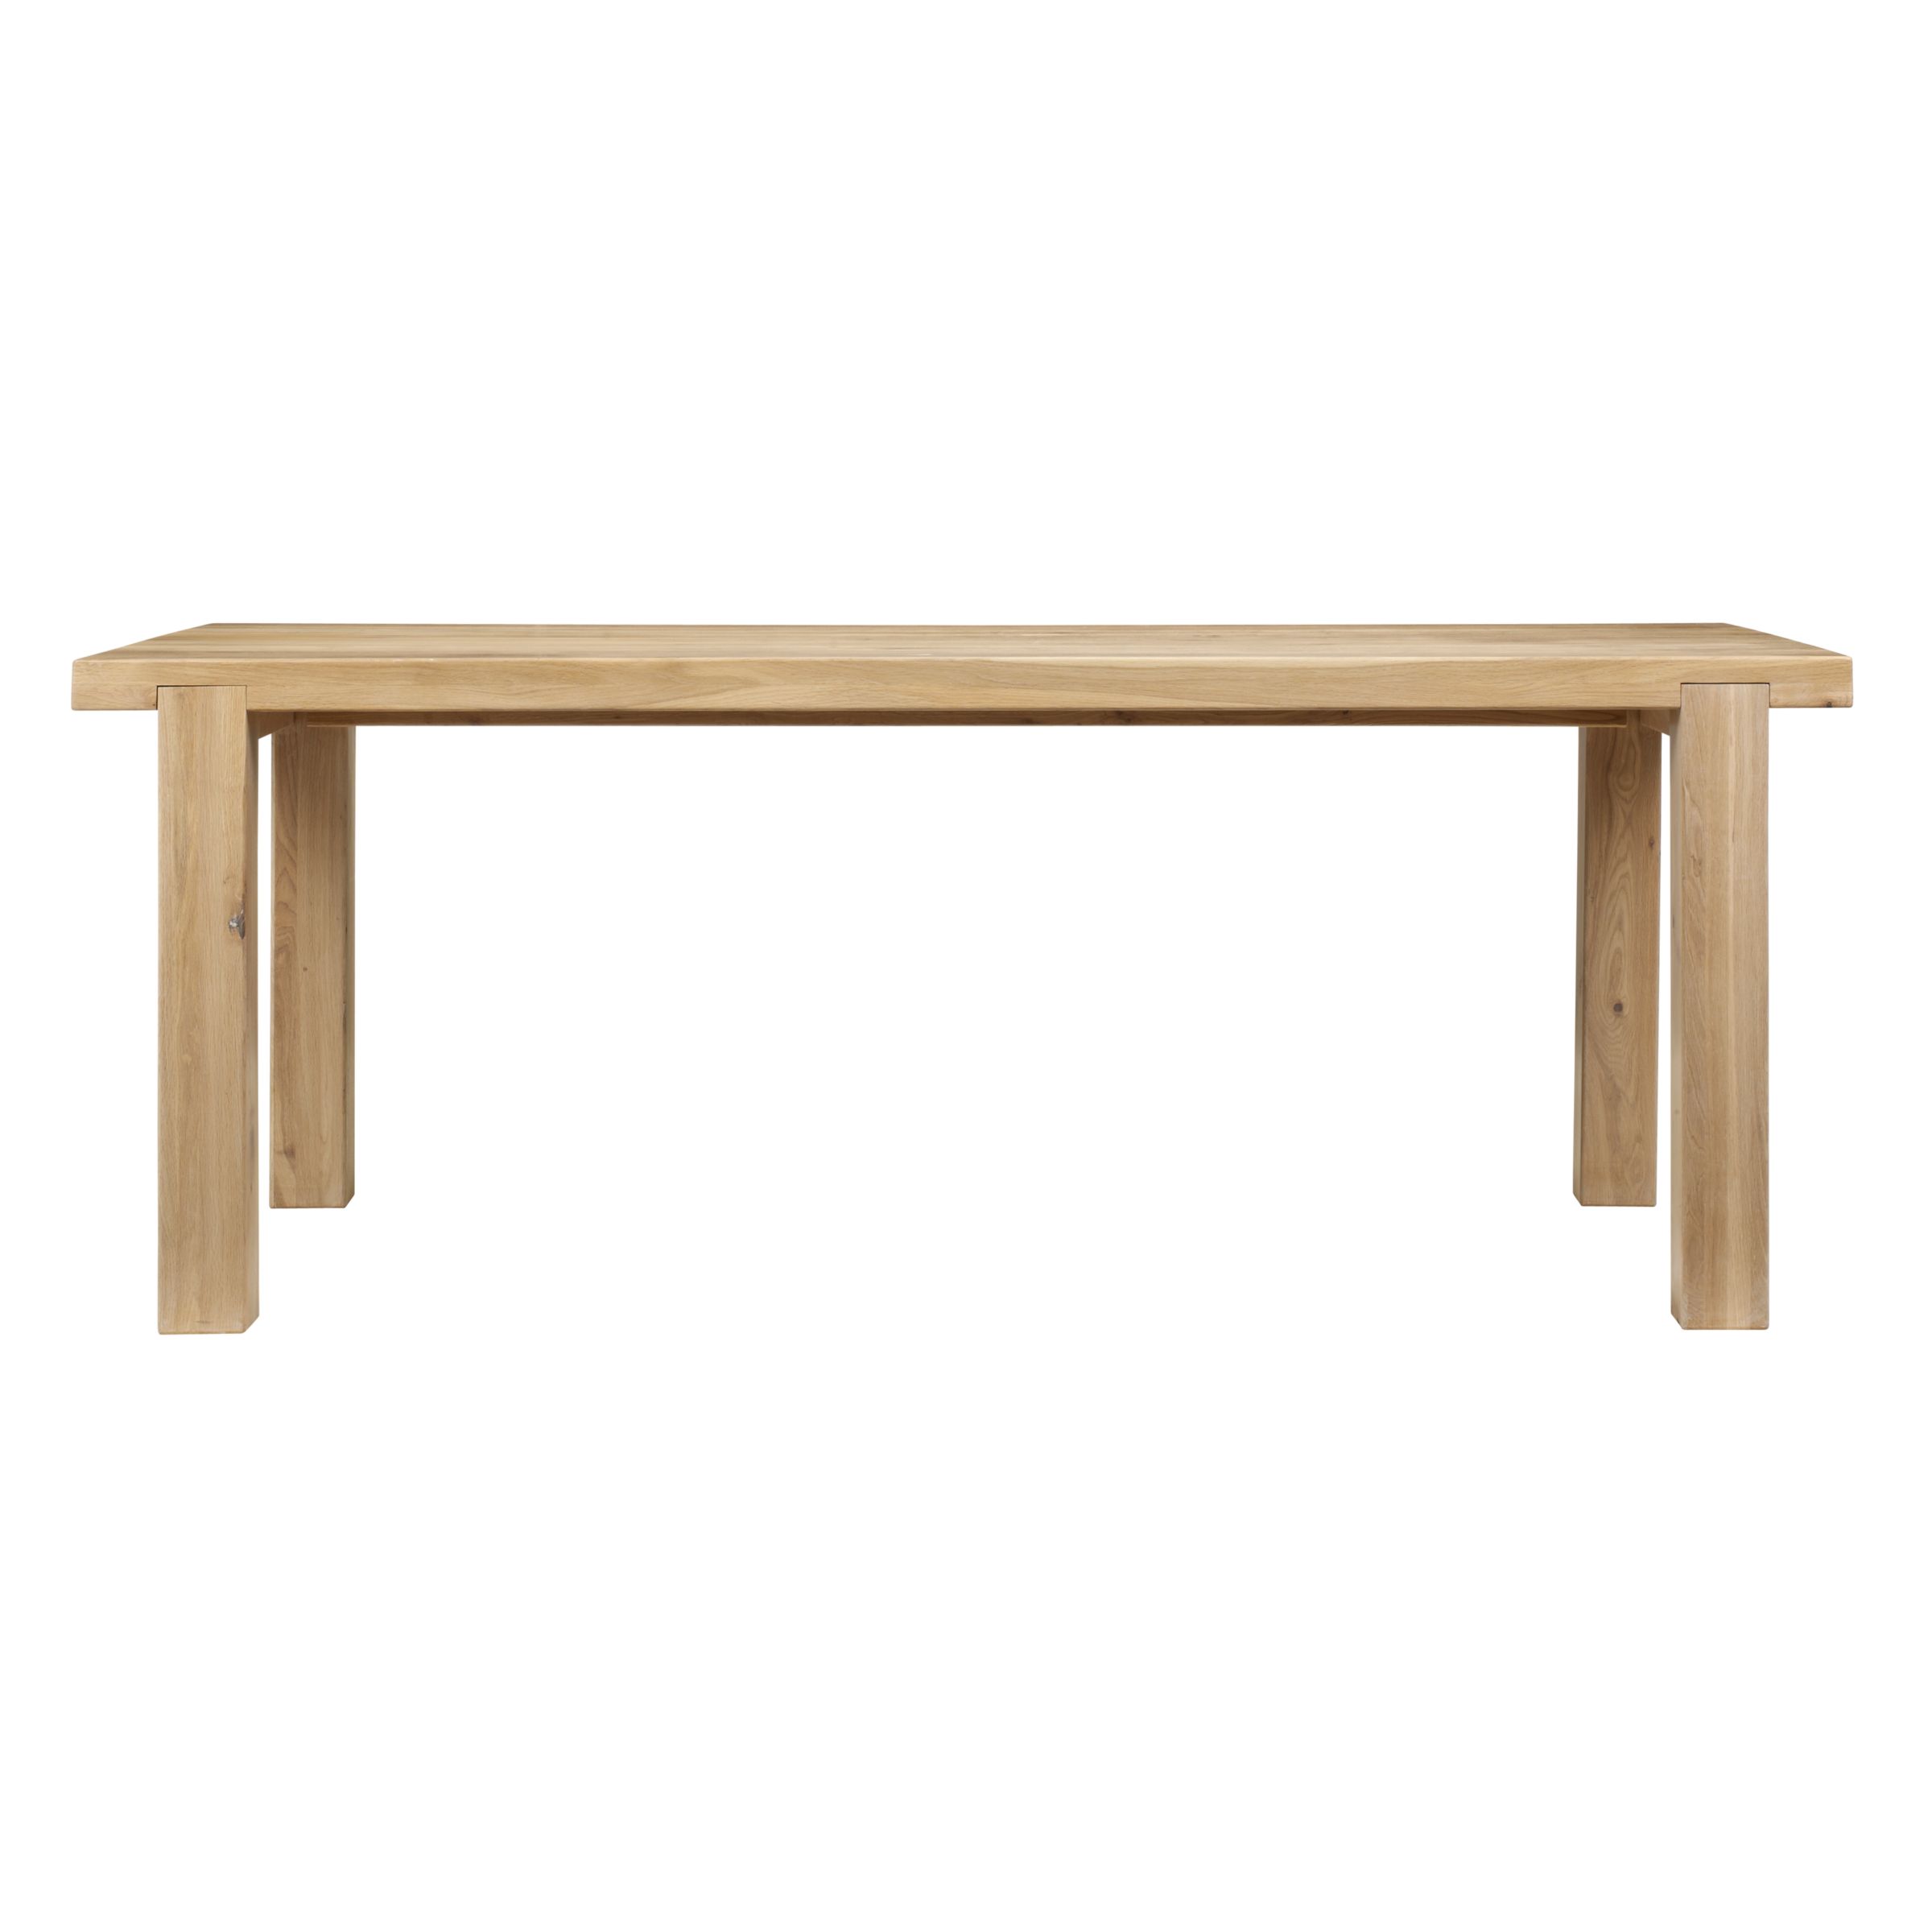 Honesty 6 Seat Dining Table